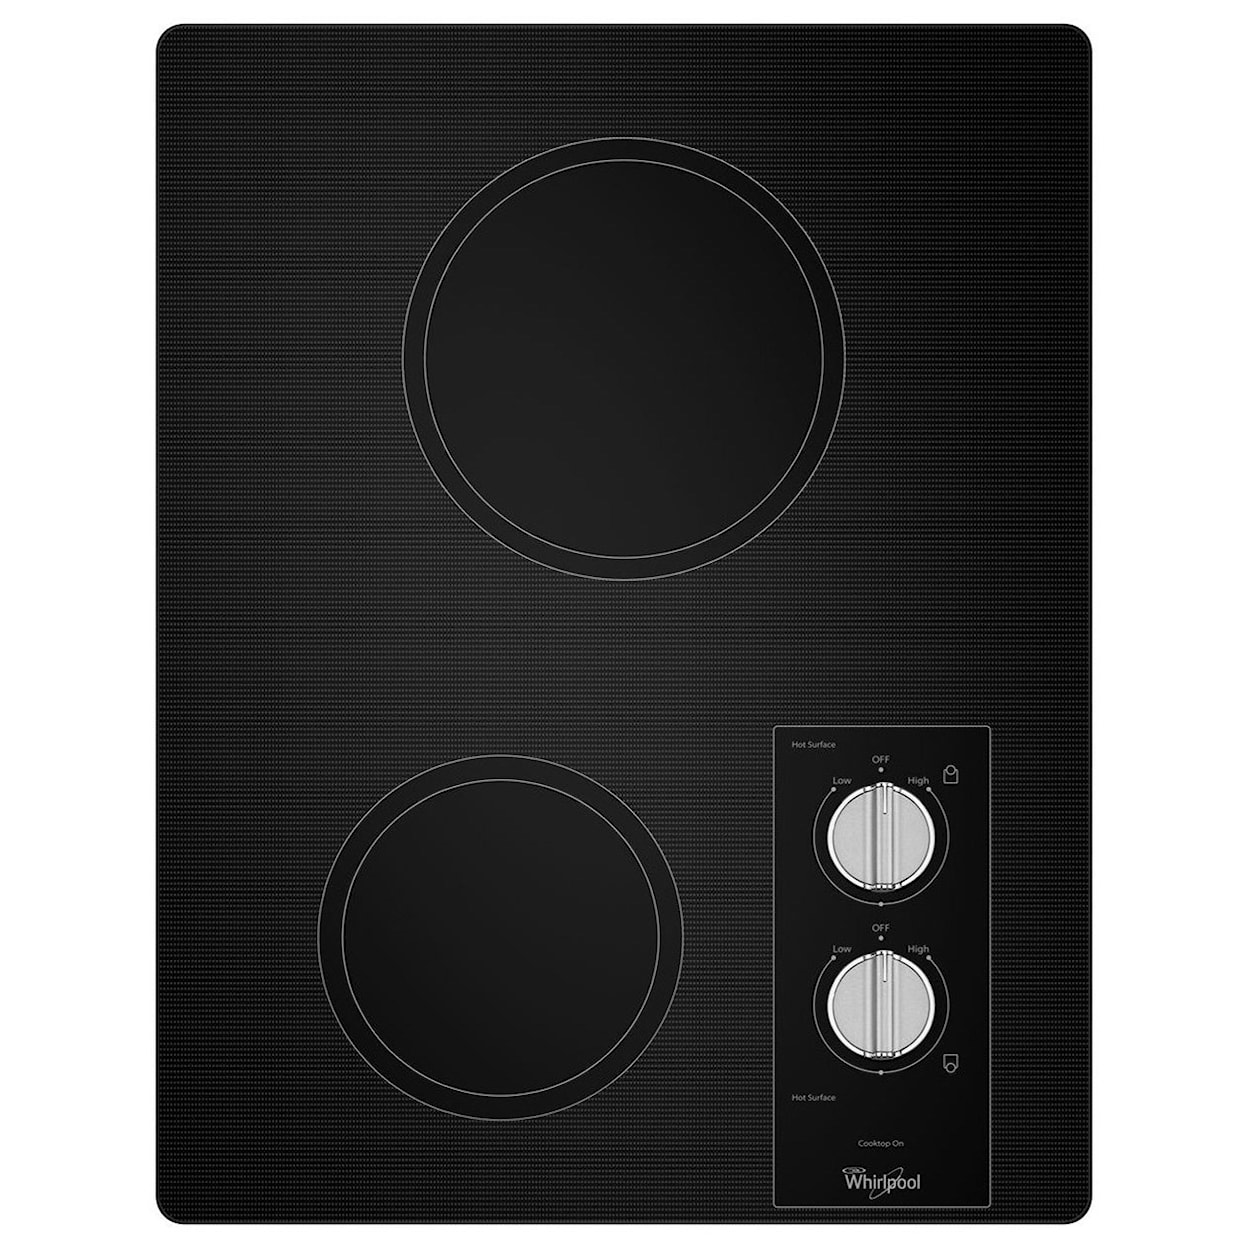 Whirlpool Electric Cooktops - Whirlpool Easy Wipe Ceramic Glass Cooktop